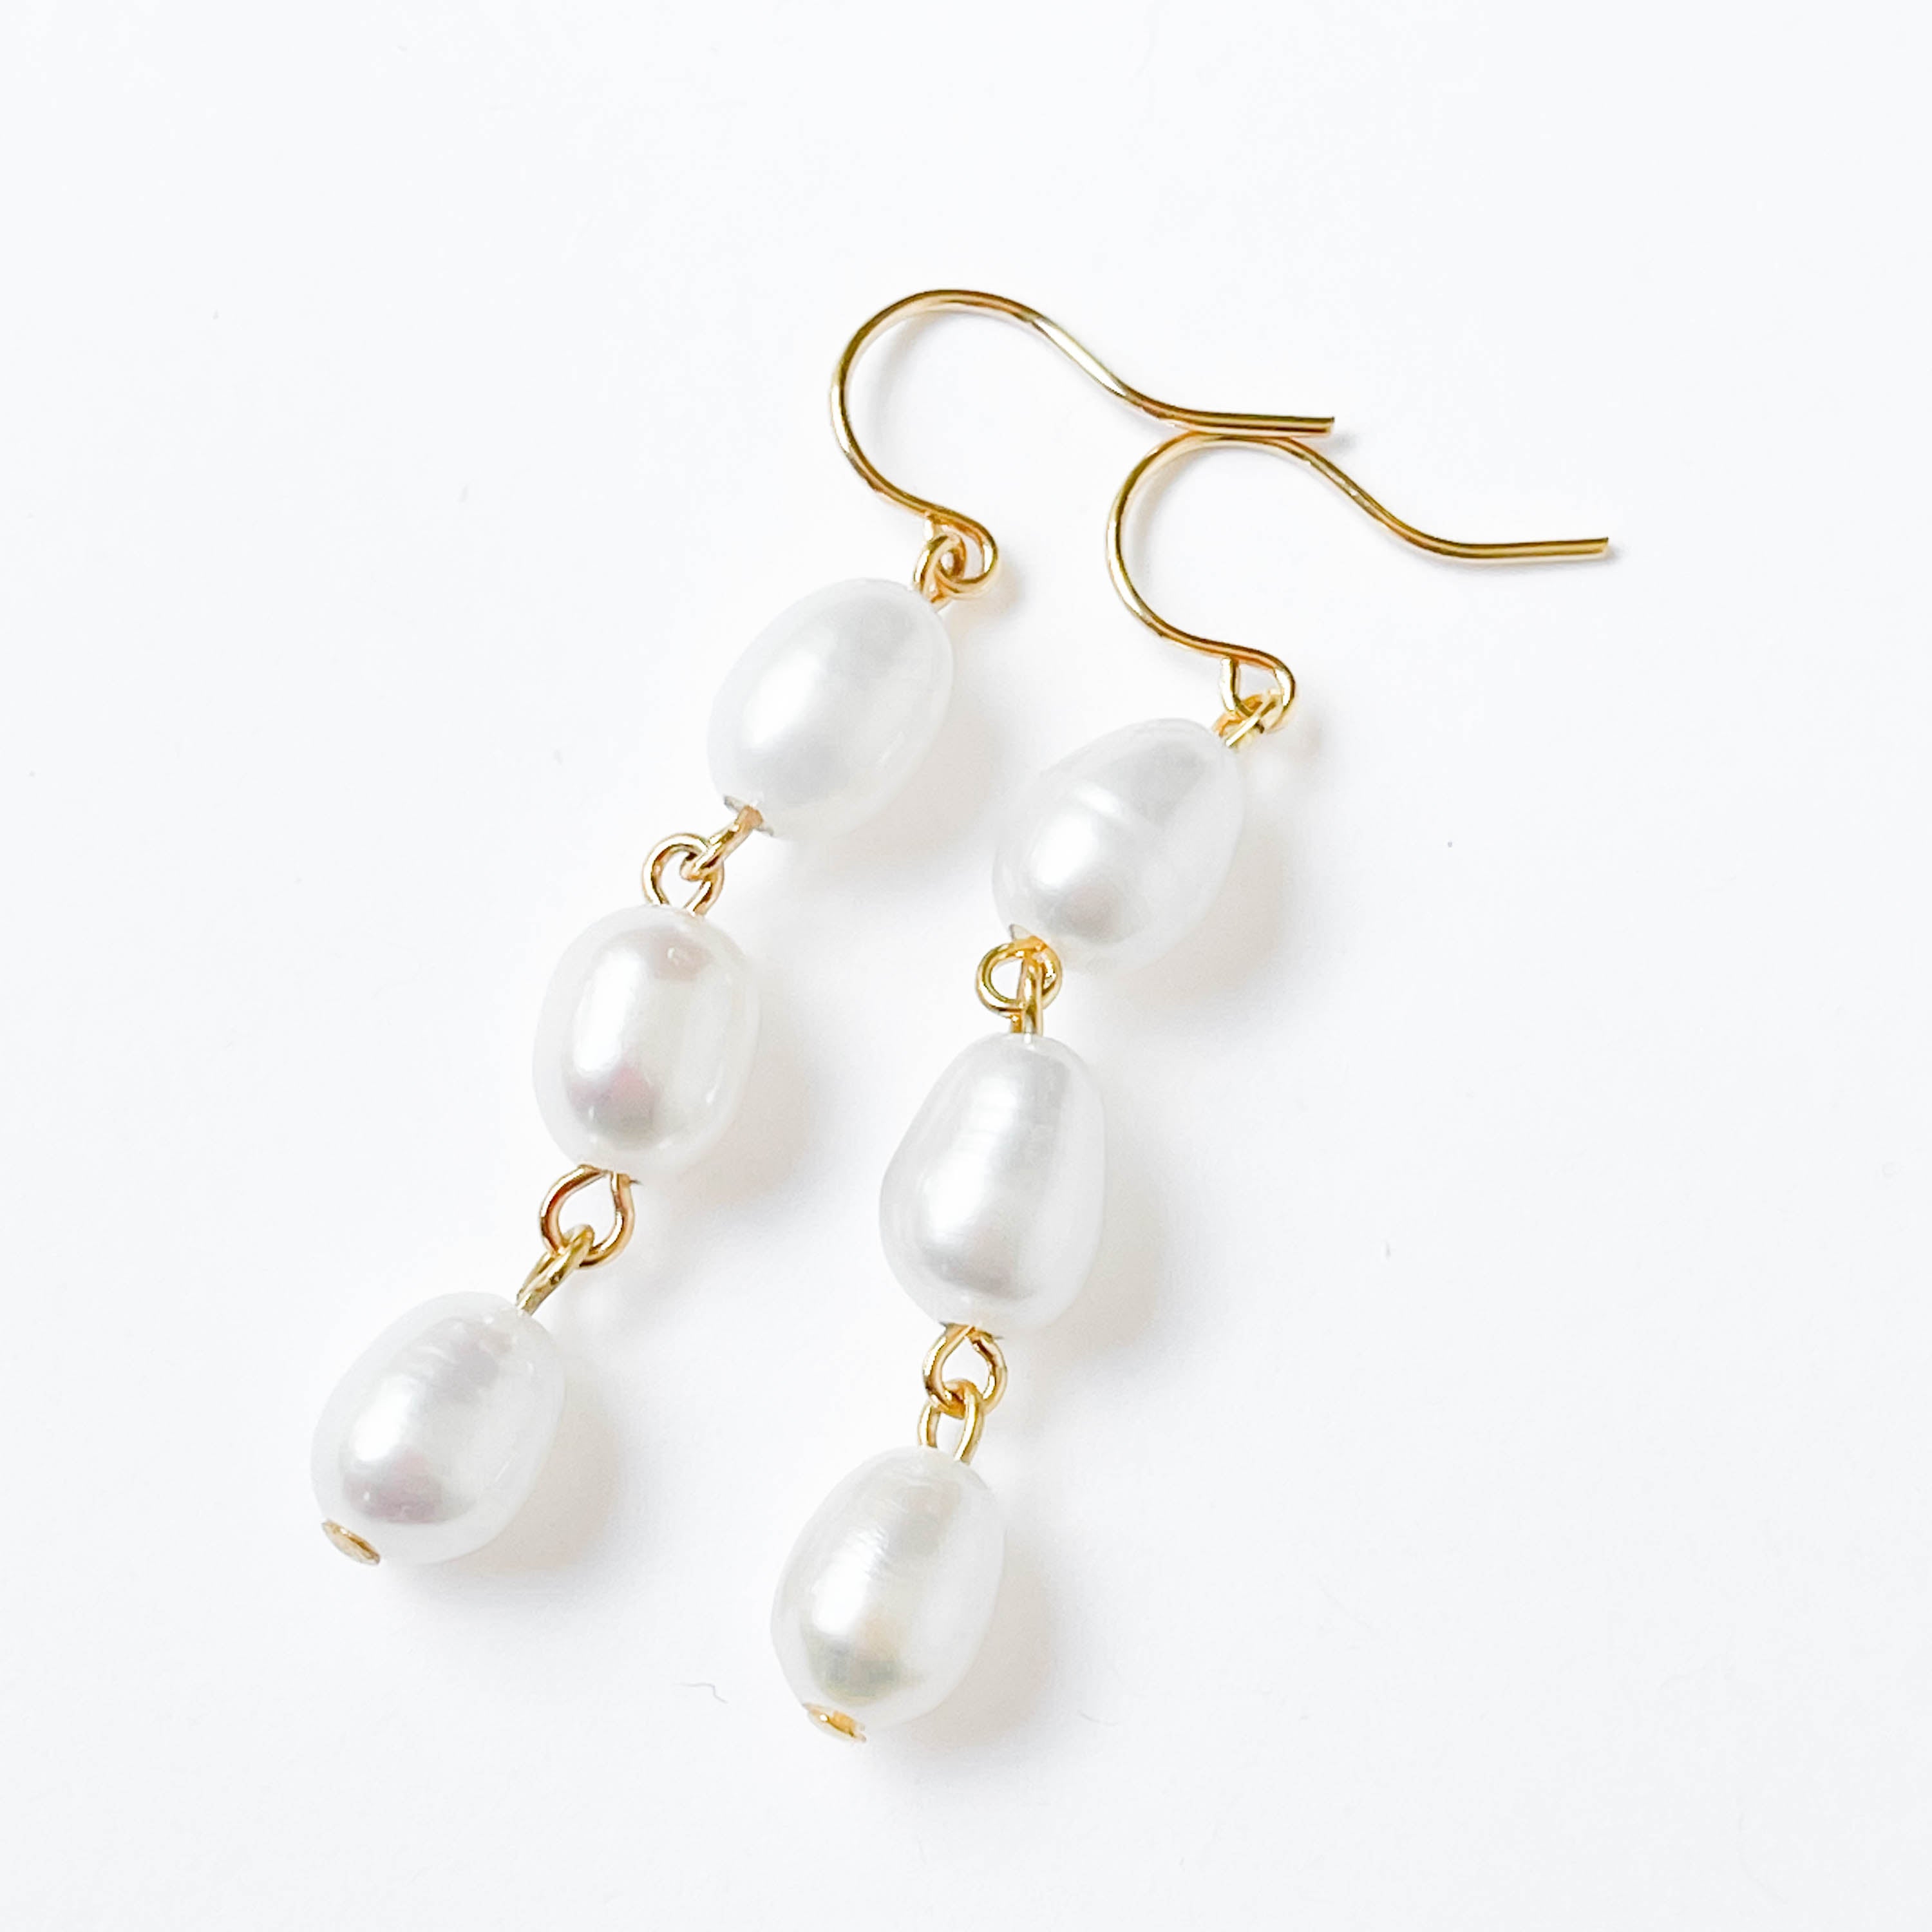 Beautiful Earrings for every occasion - Nest Pretty Things